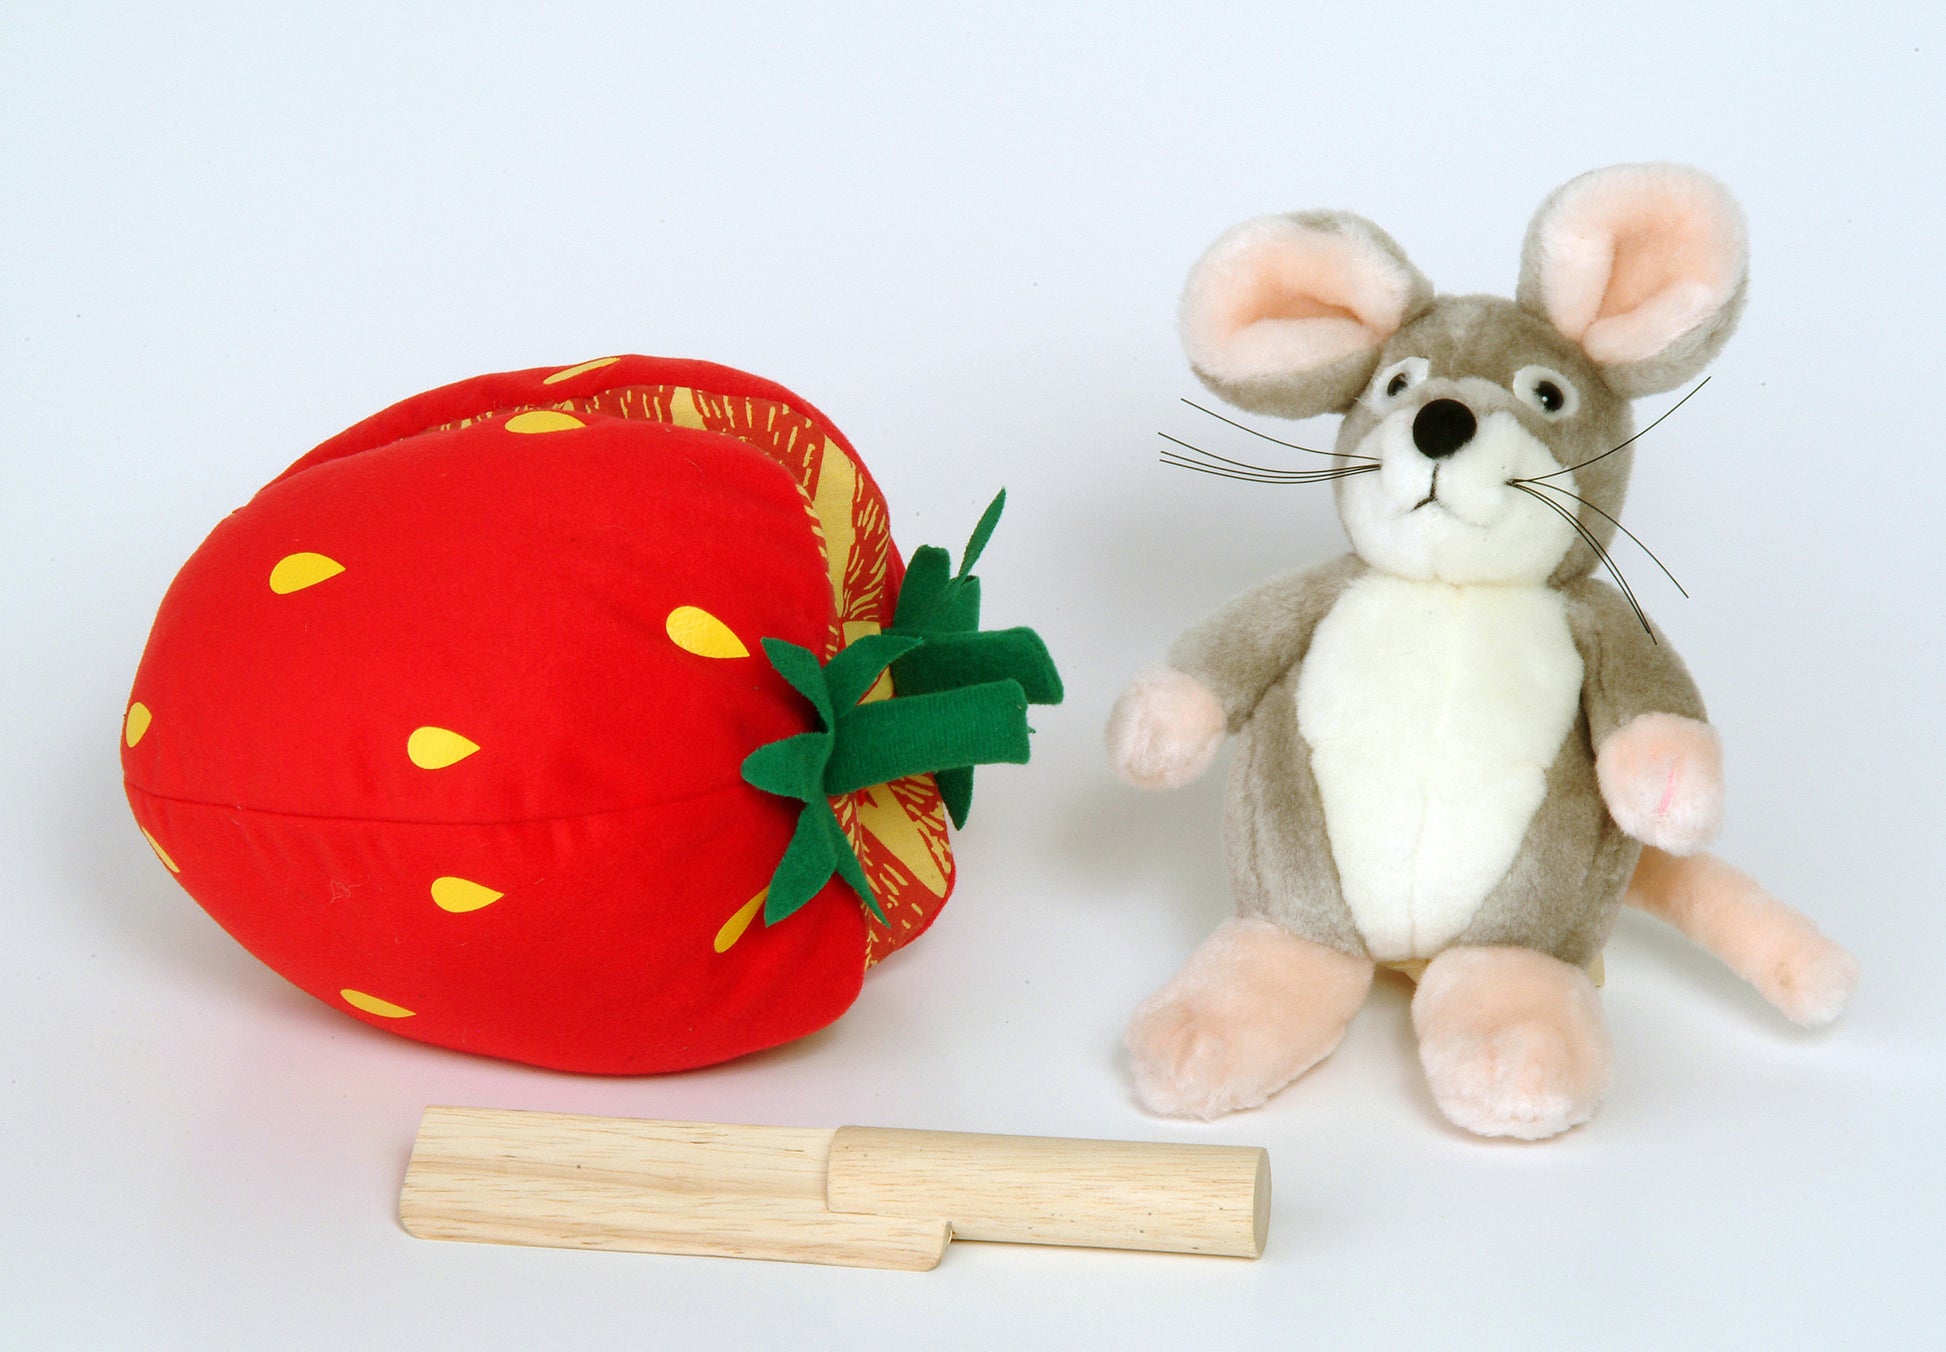 Plush Strawberry and Wooden Knife